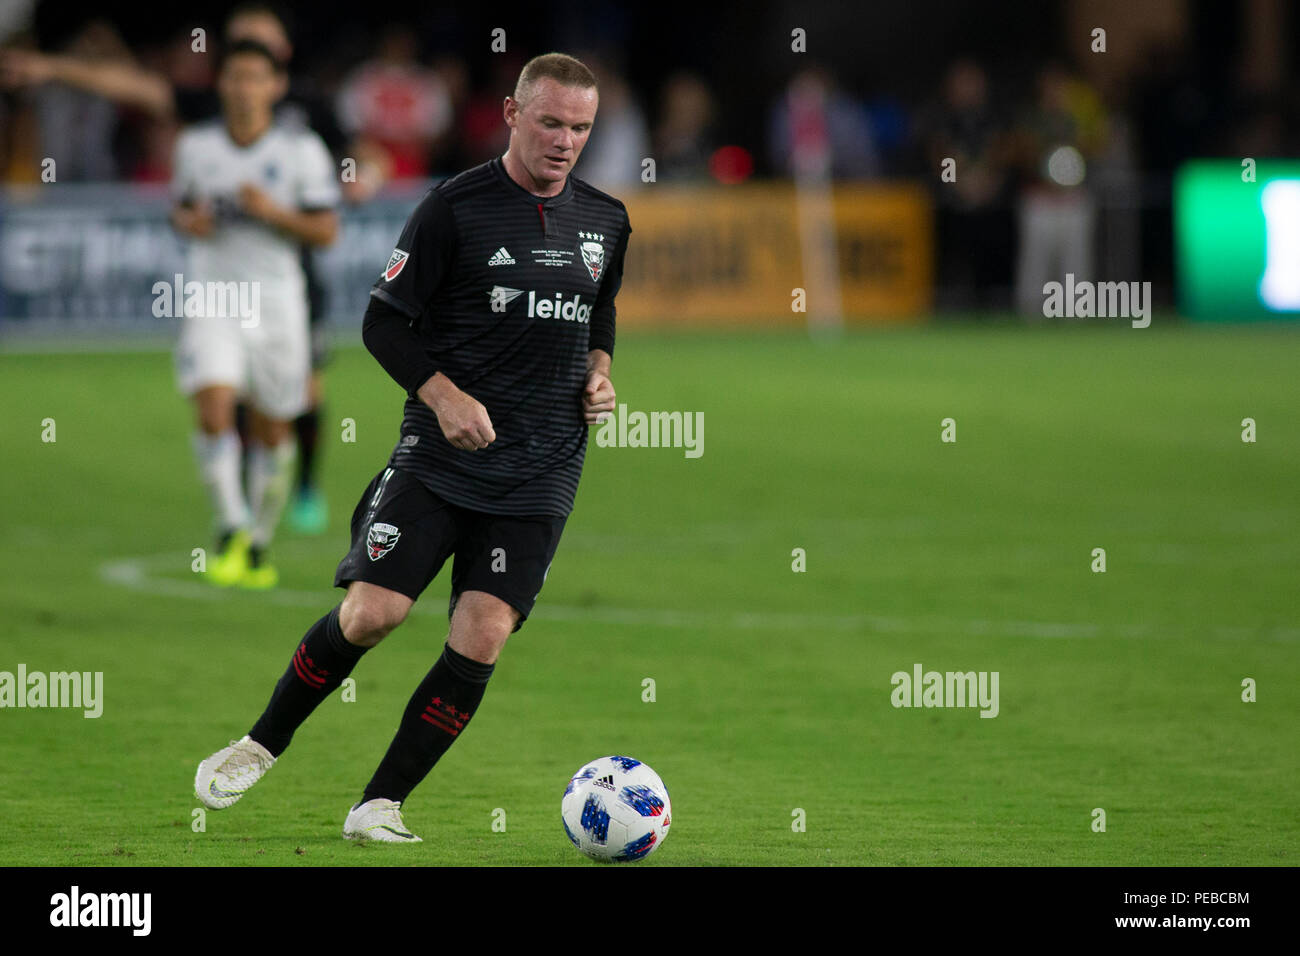 Washington, United States. 14th July, 2018. D.C. United forward Wayne Rooney (9) dribbles during the game between D.C. United and Vancouver Whitecaps at Audi Filed in Washington, DC on July 14, 2018. D.C. This is D.C. United's first game at Audi Field. Credit: The Photo Access/Alamy Live News Stock Photo